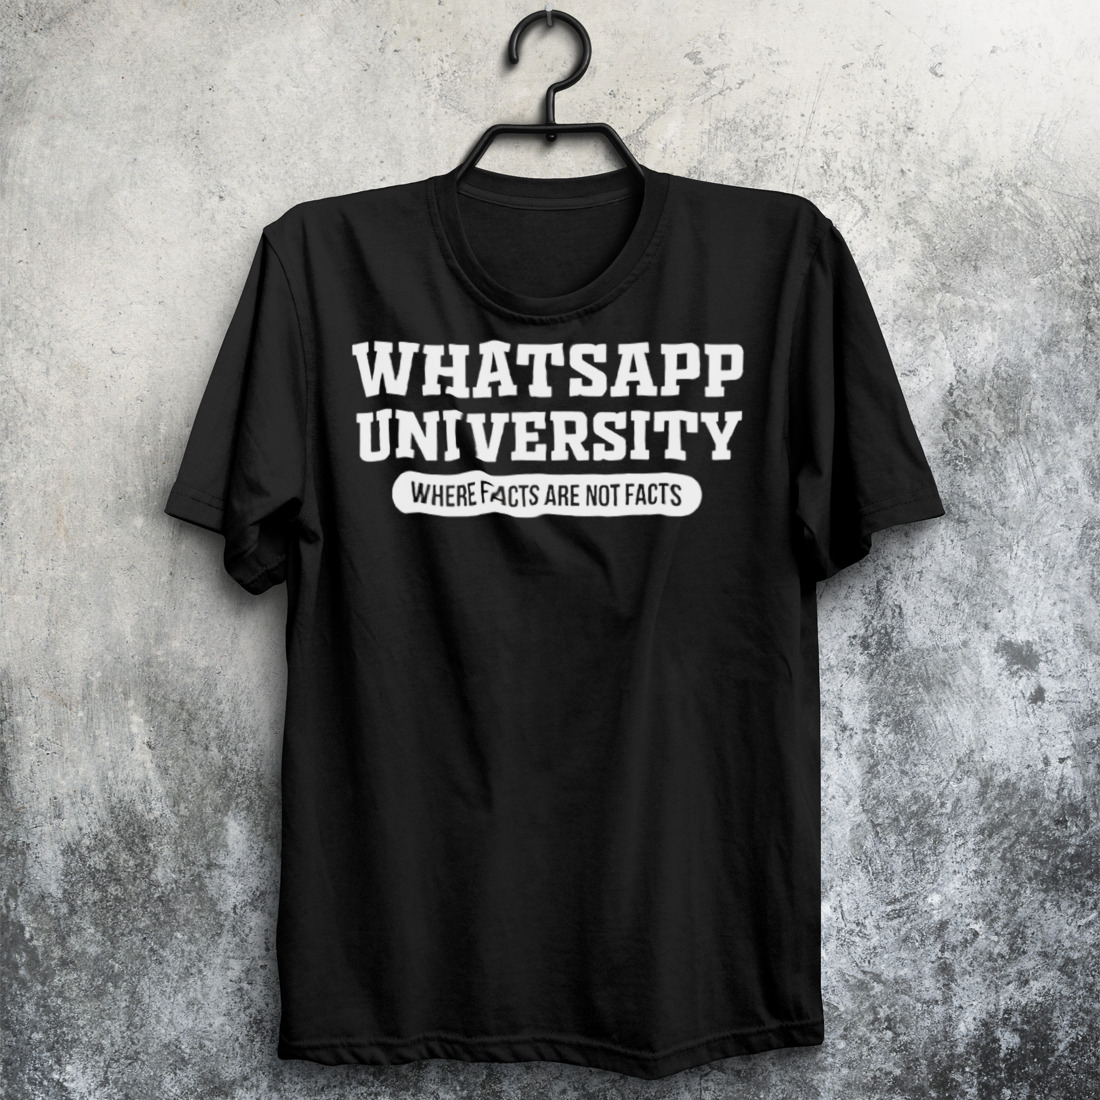 Whatsapp university where facts are not facts shirt